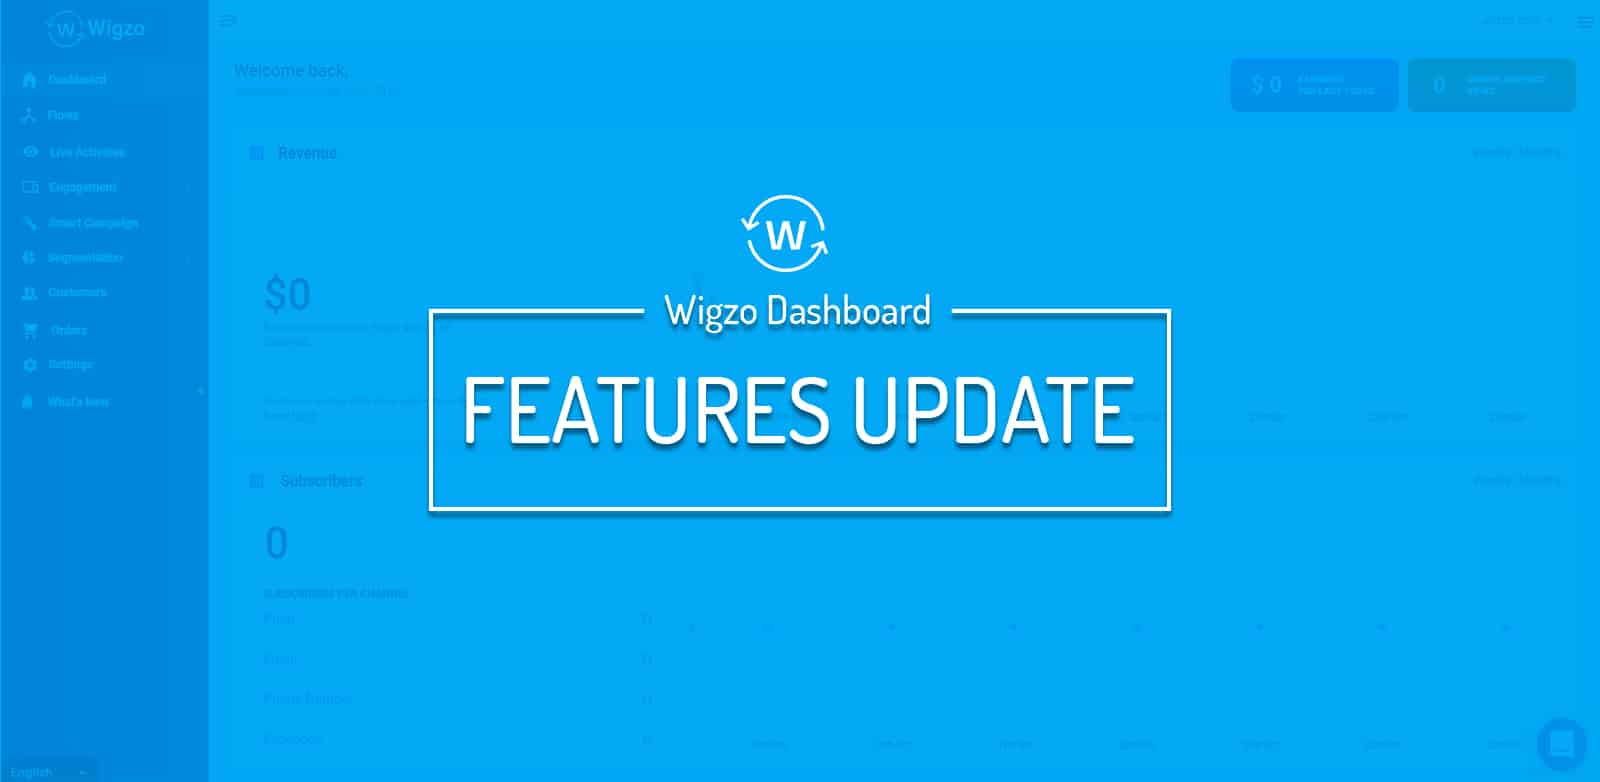 New Features Update of Wigzo